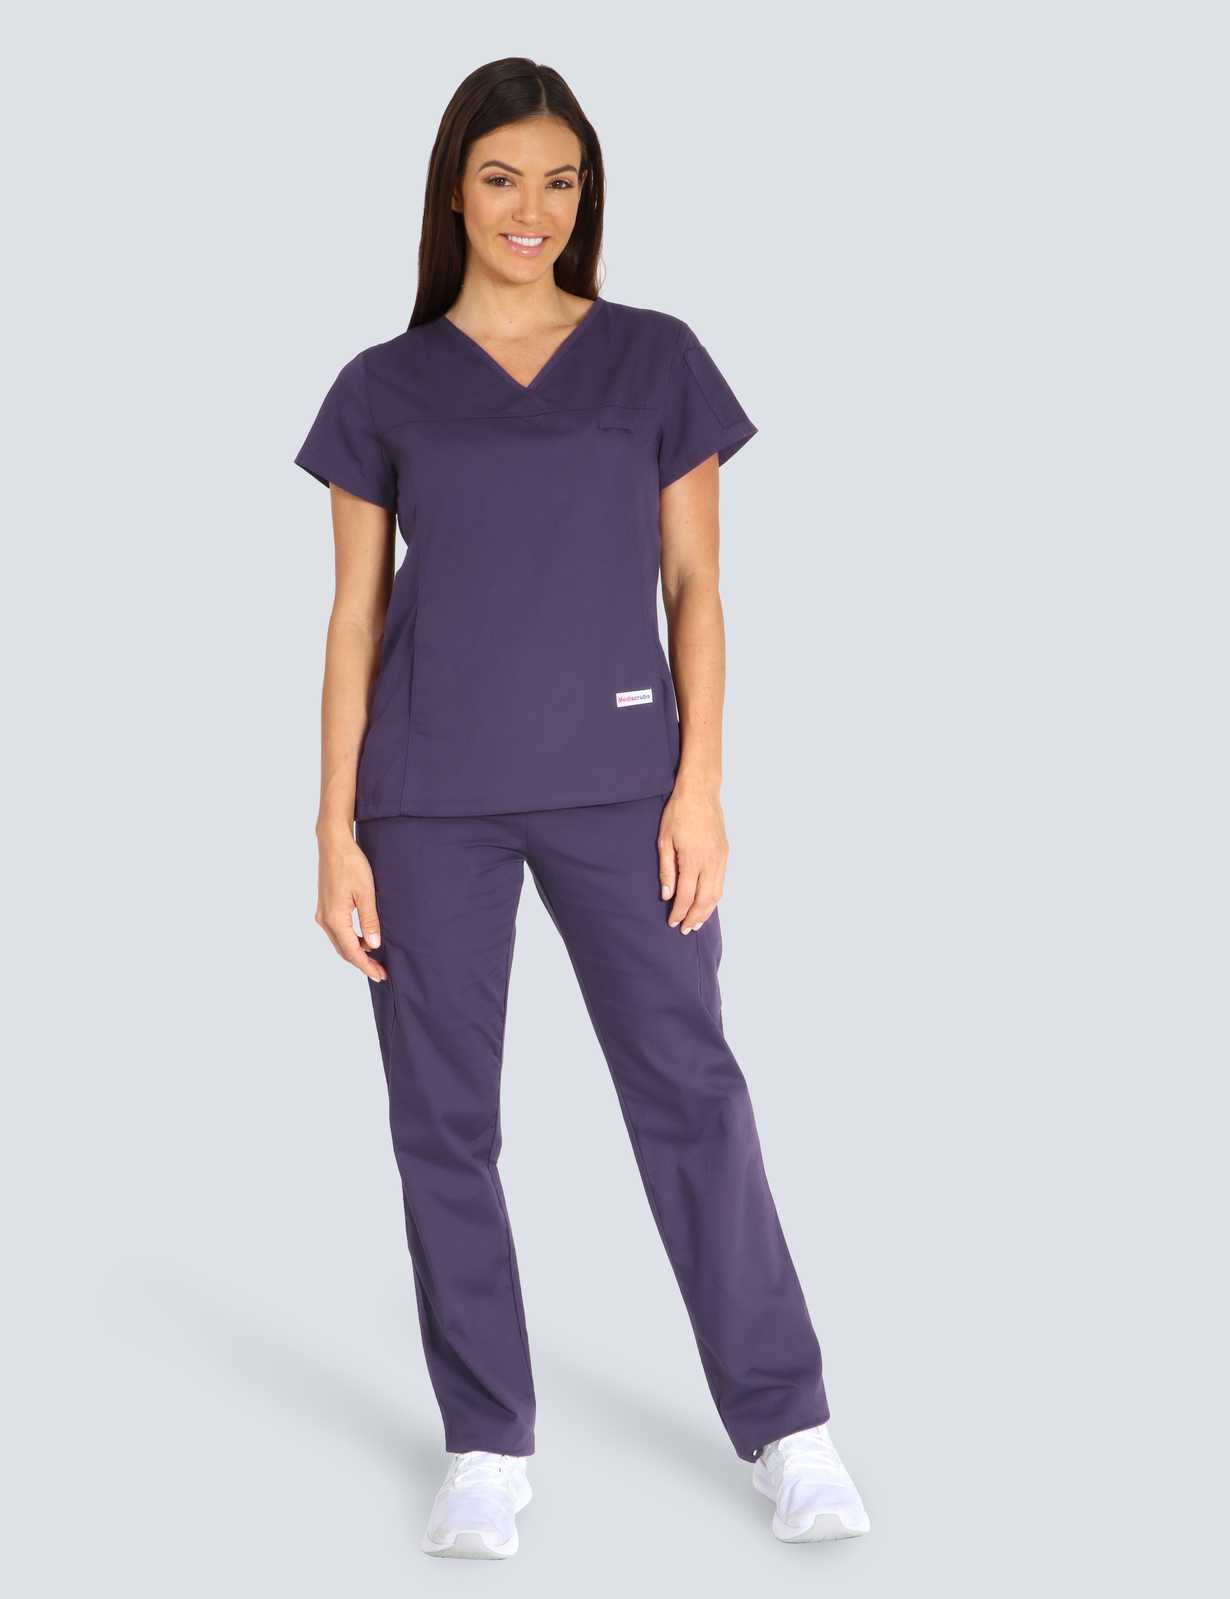 Peninsula Health - Dialysis CNS (Women's Fit Solid Scrub Top and Cargo Pants in Aubergine incl Logos)